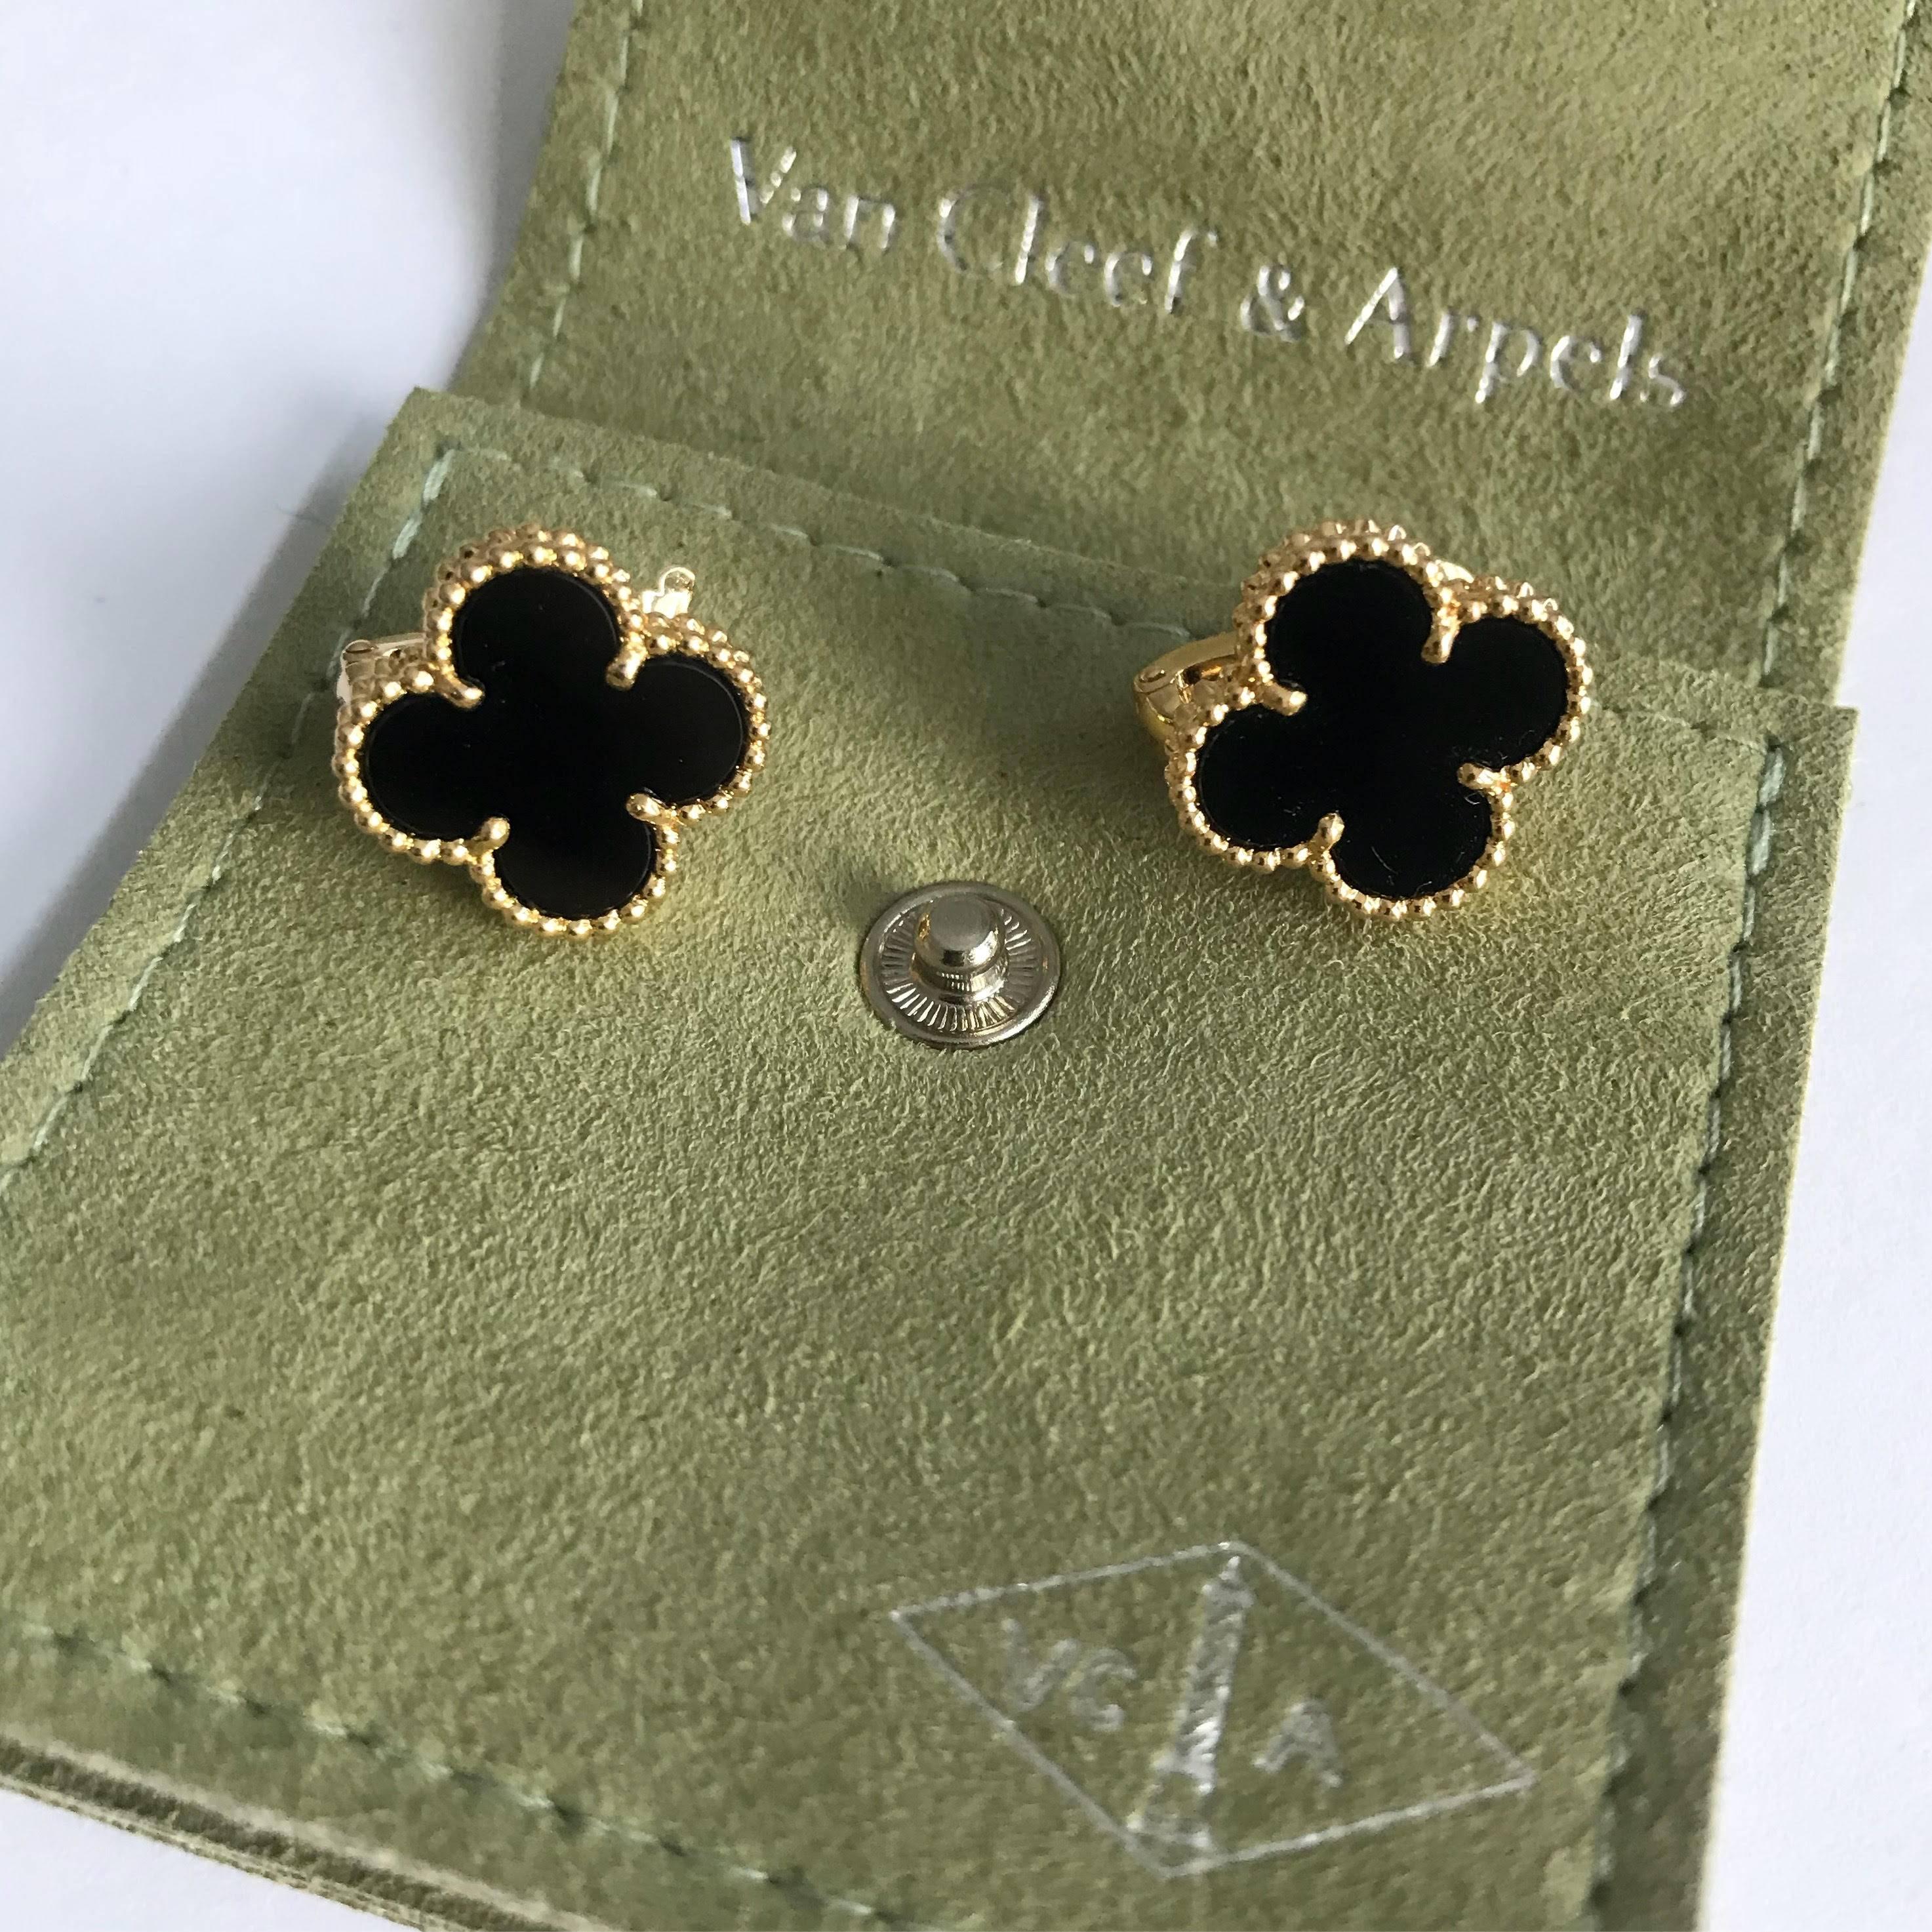 Van Cleef and Arpels Vintage Alhambra Black Onyx 18k Gold Clip Earrings.  Measures 15mm across or 0.59 inches.  Fully hallmarked on back of clip 750 VCA and Serial number. Peirced post earrings with additional leverback.  Excellent pre-owned